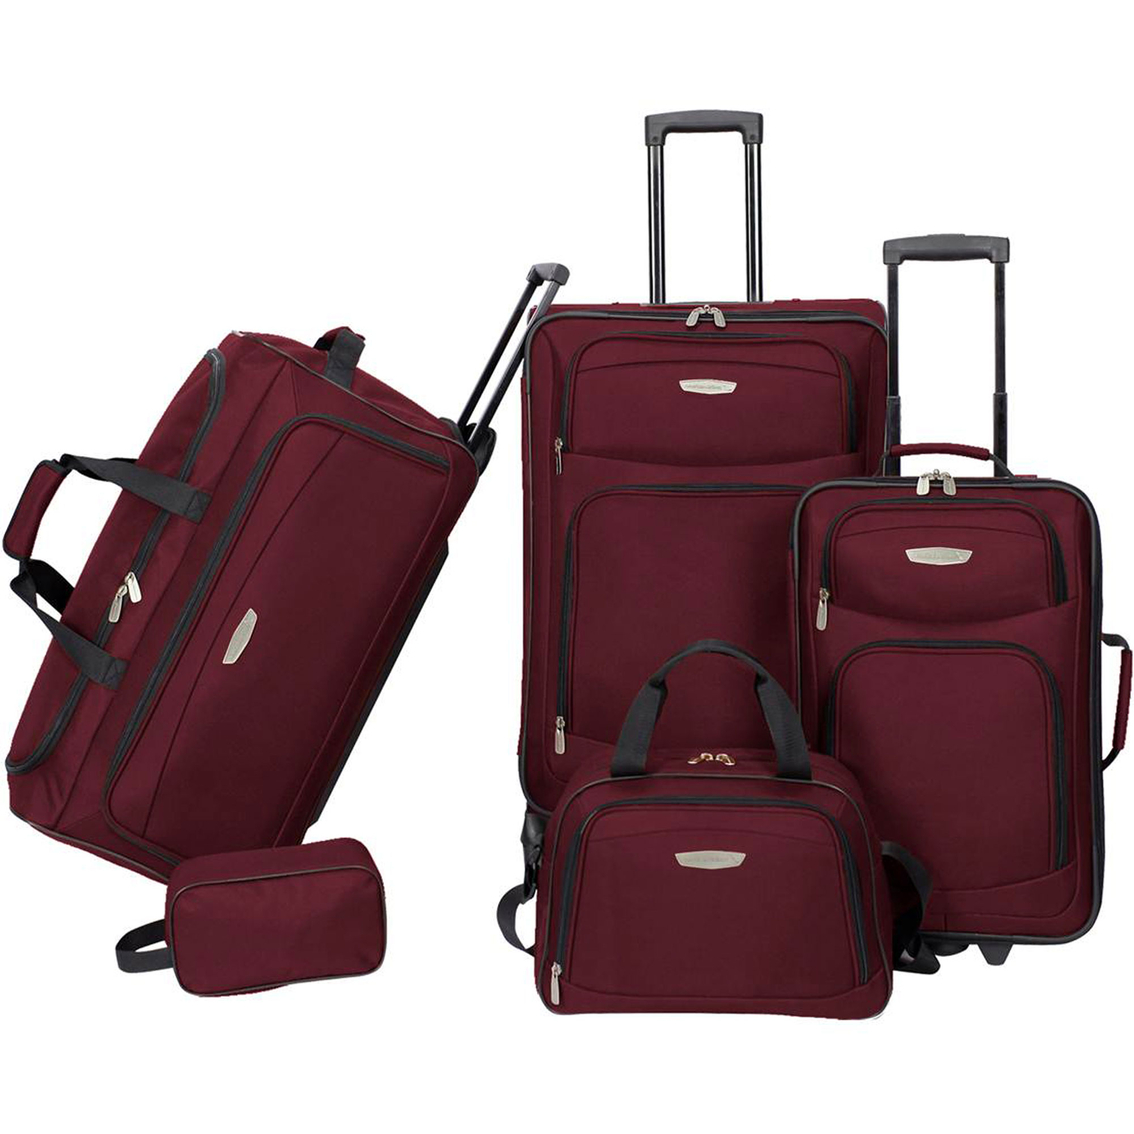 american airlines travel bags